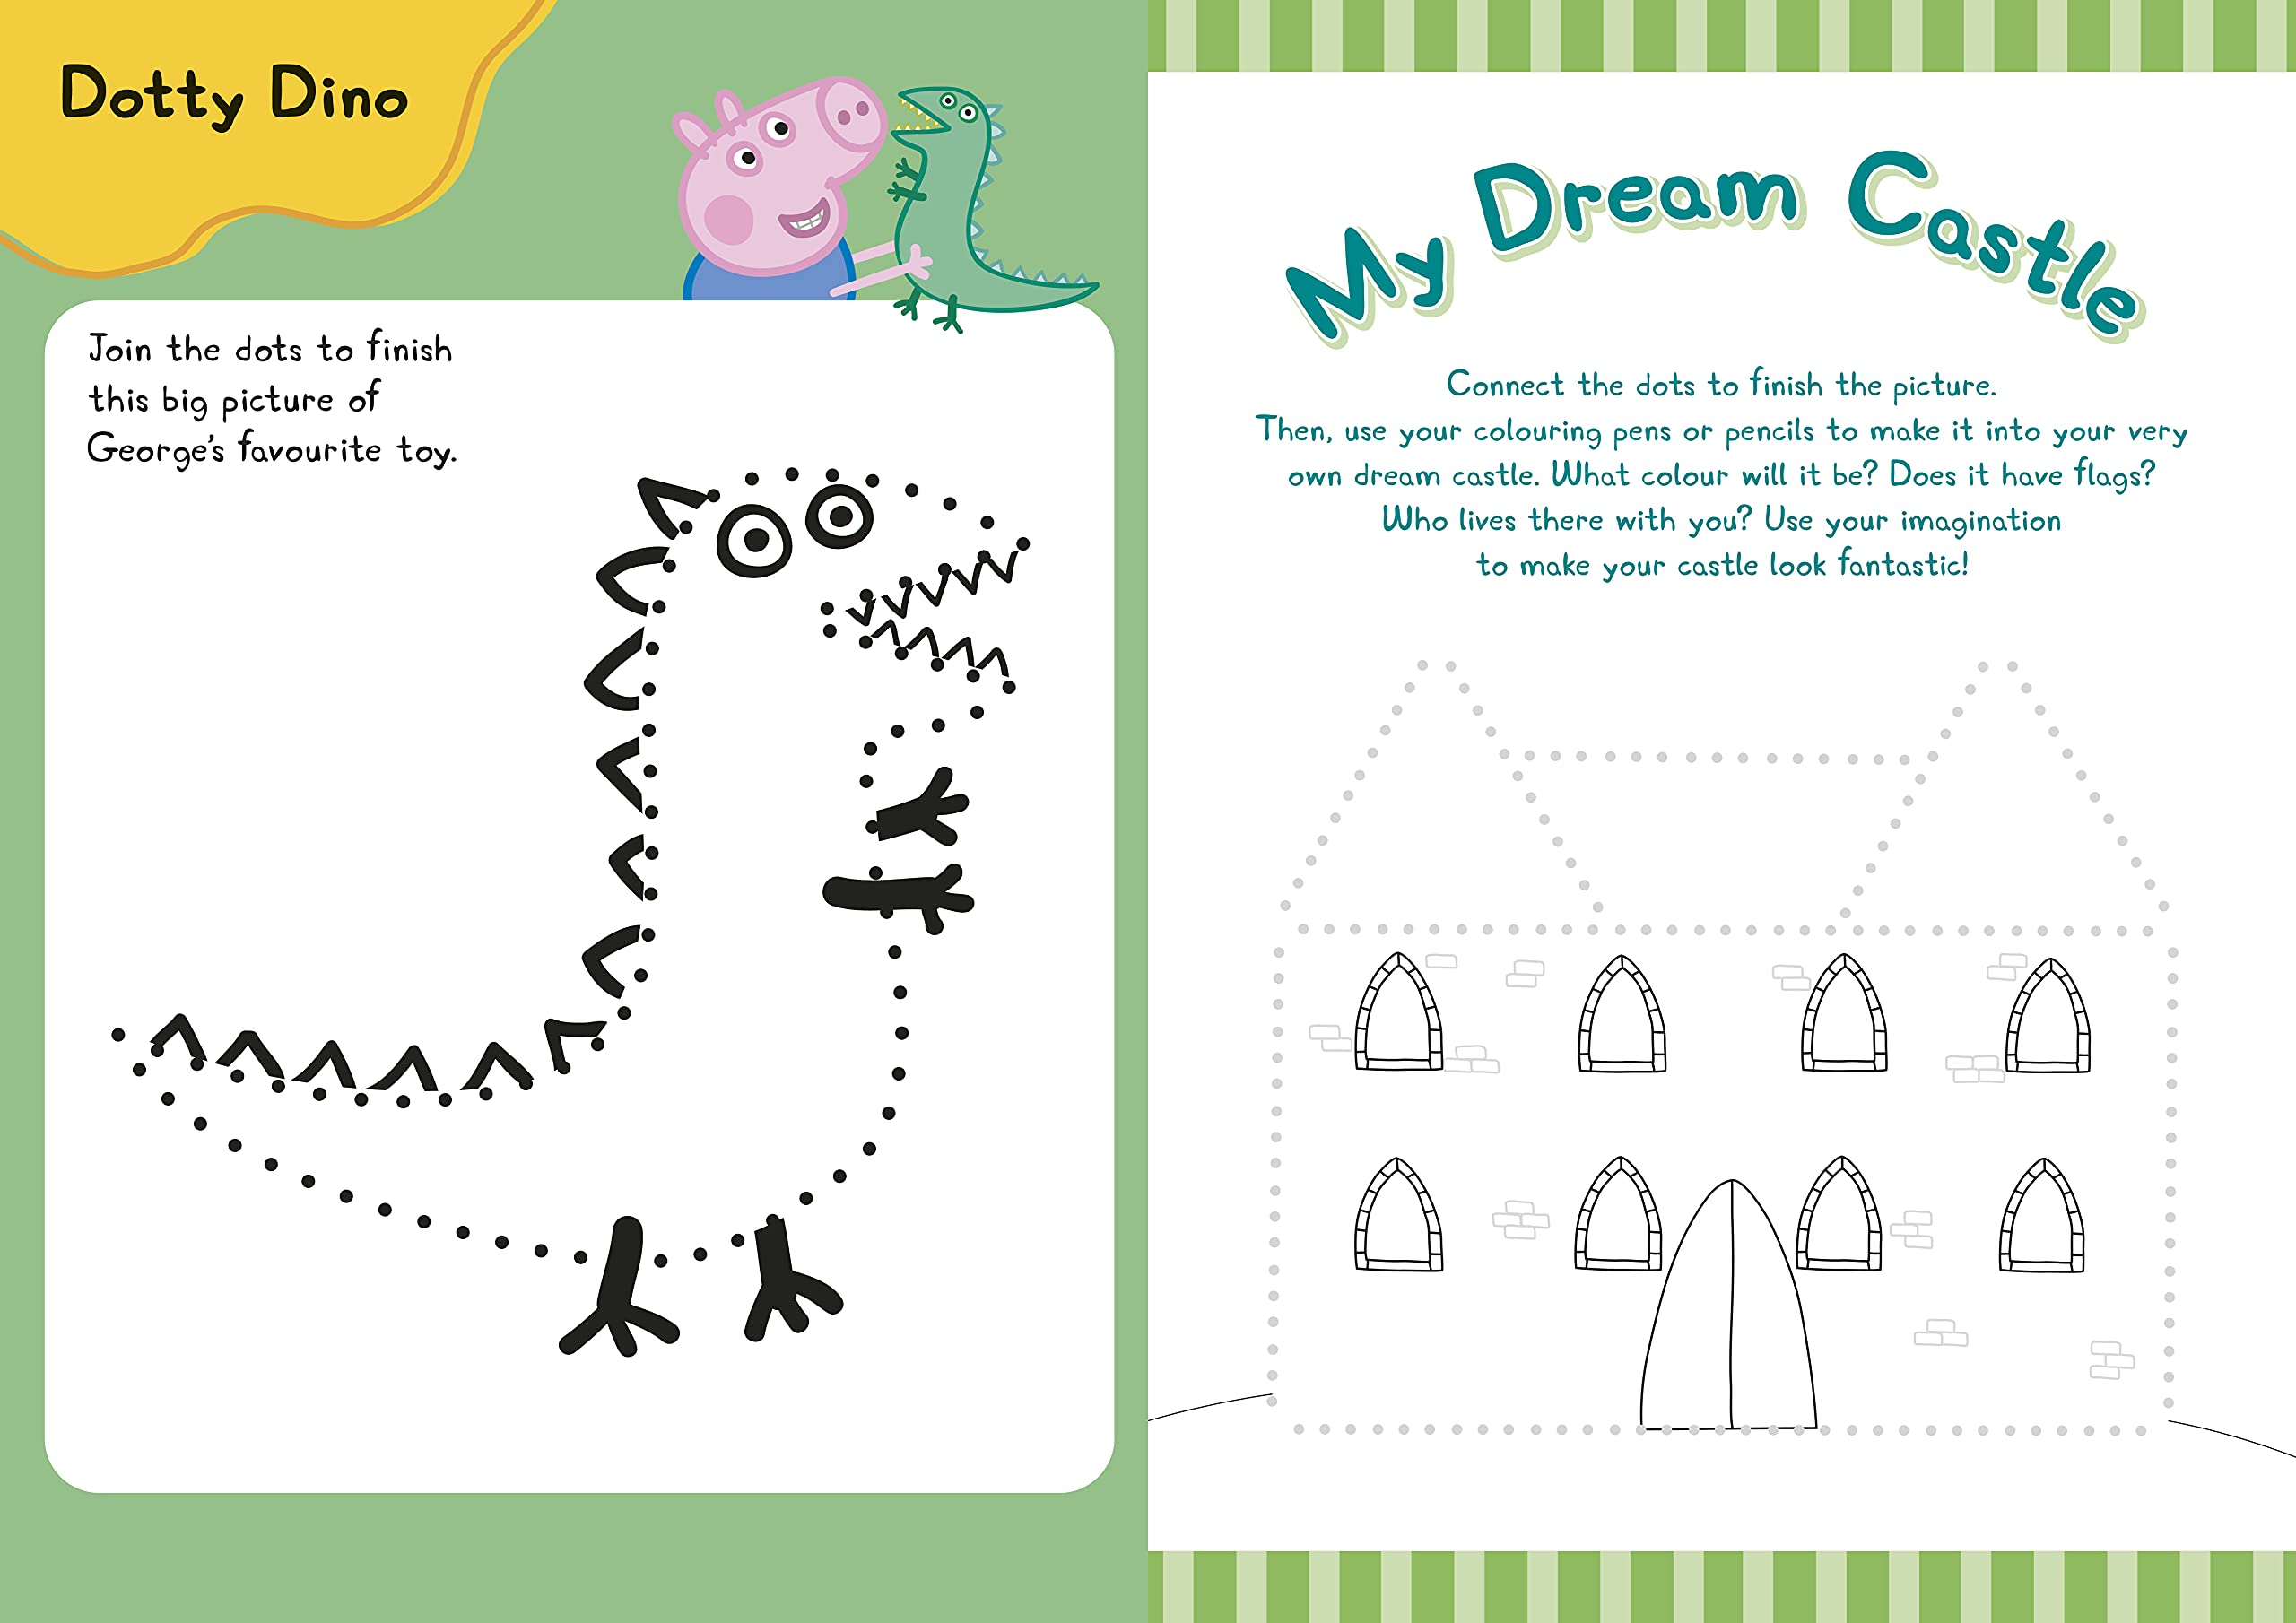 Peppa Pig: MY First Book of Patterns : Pencil Control